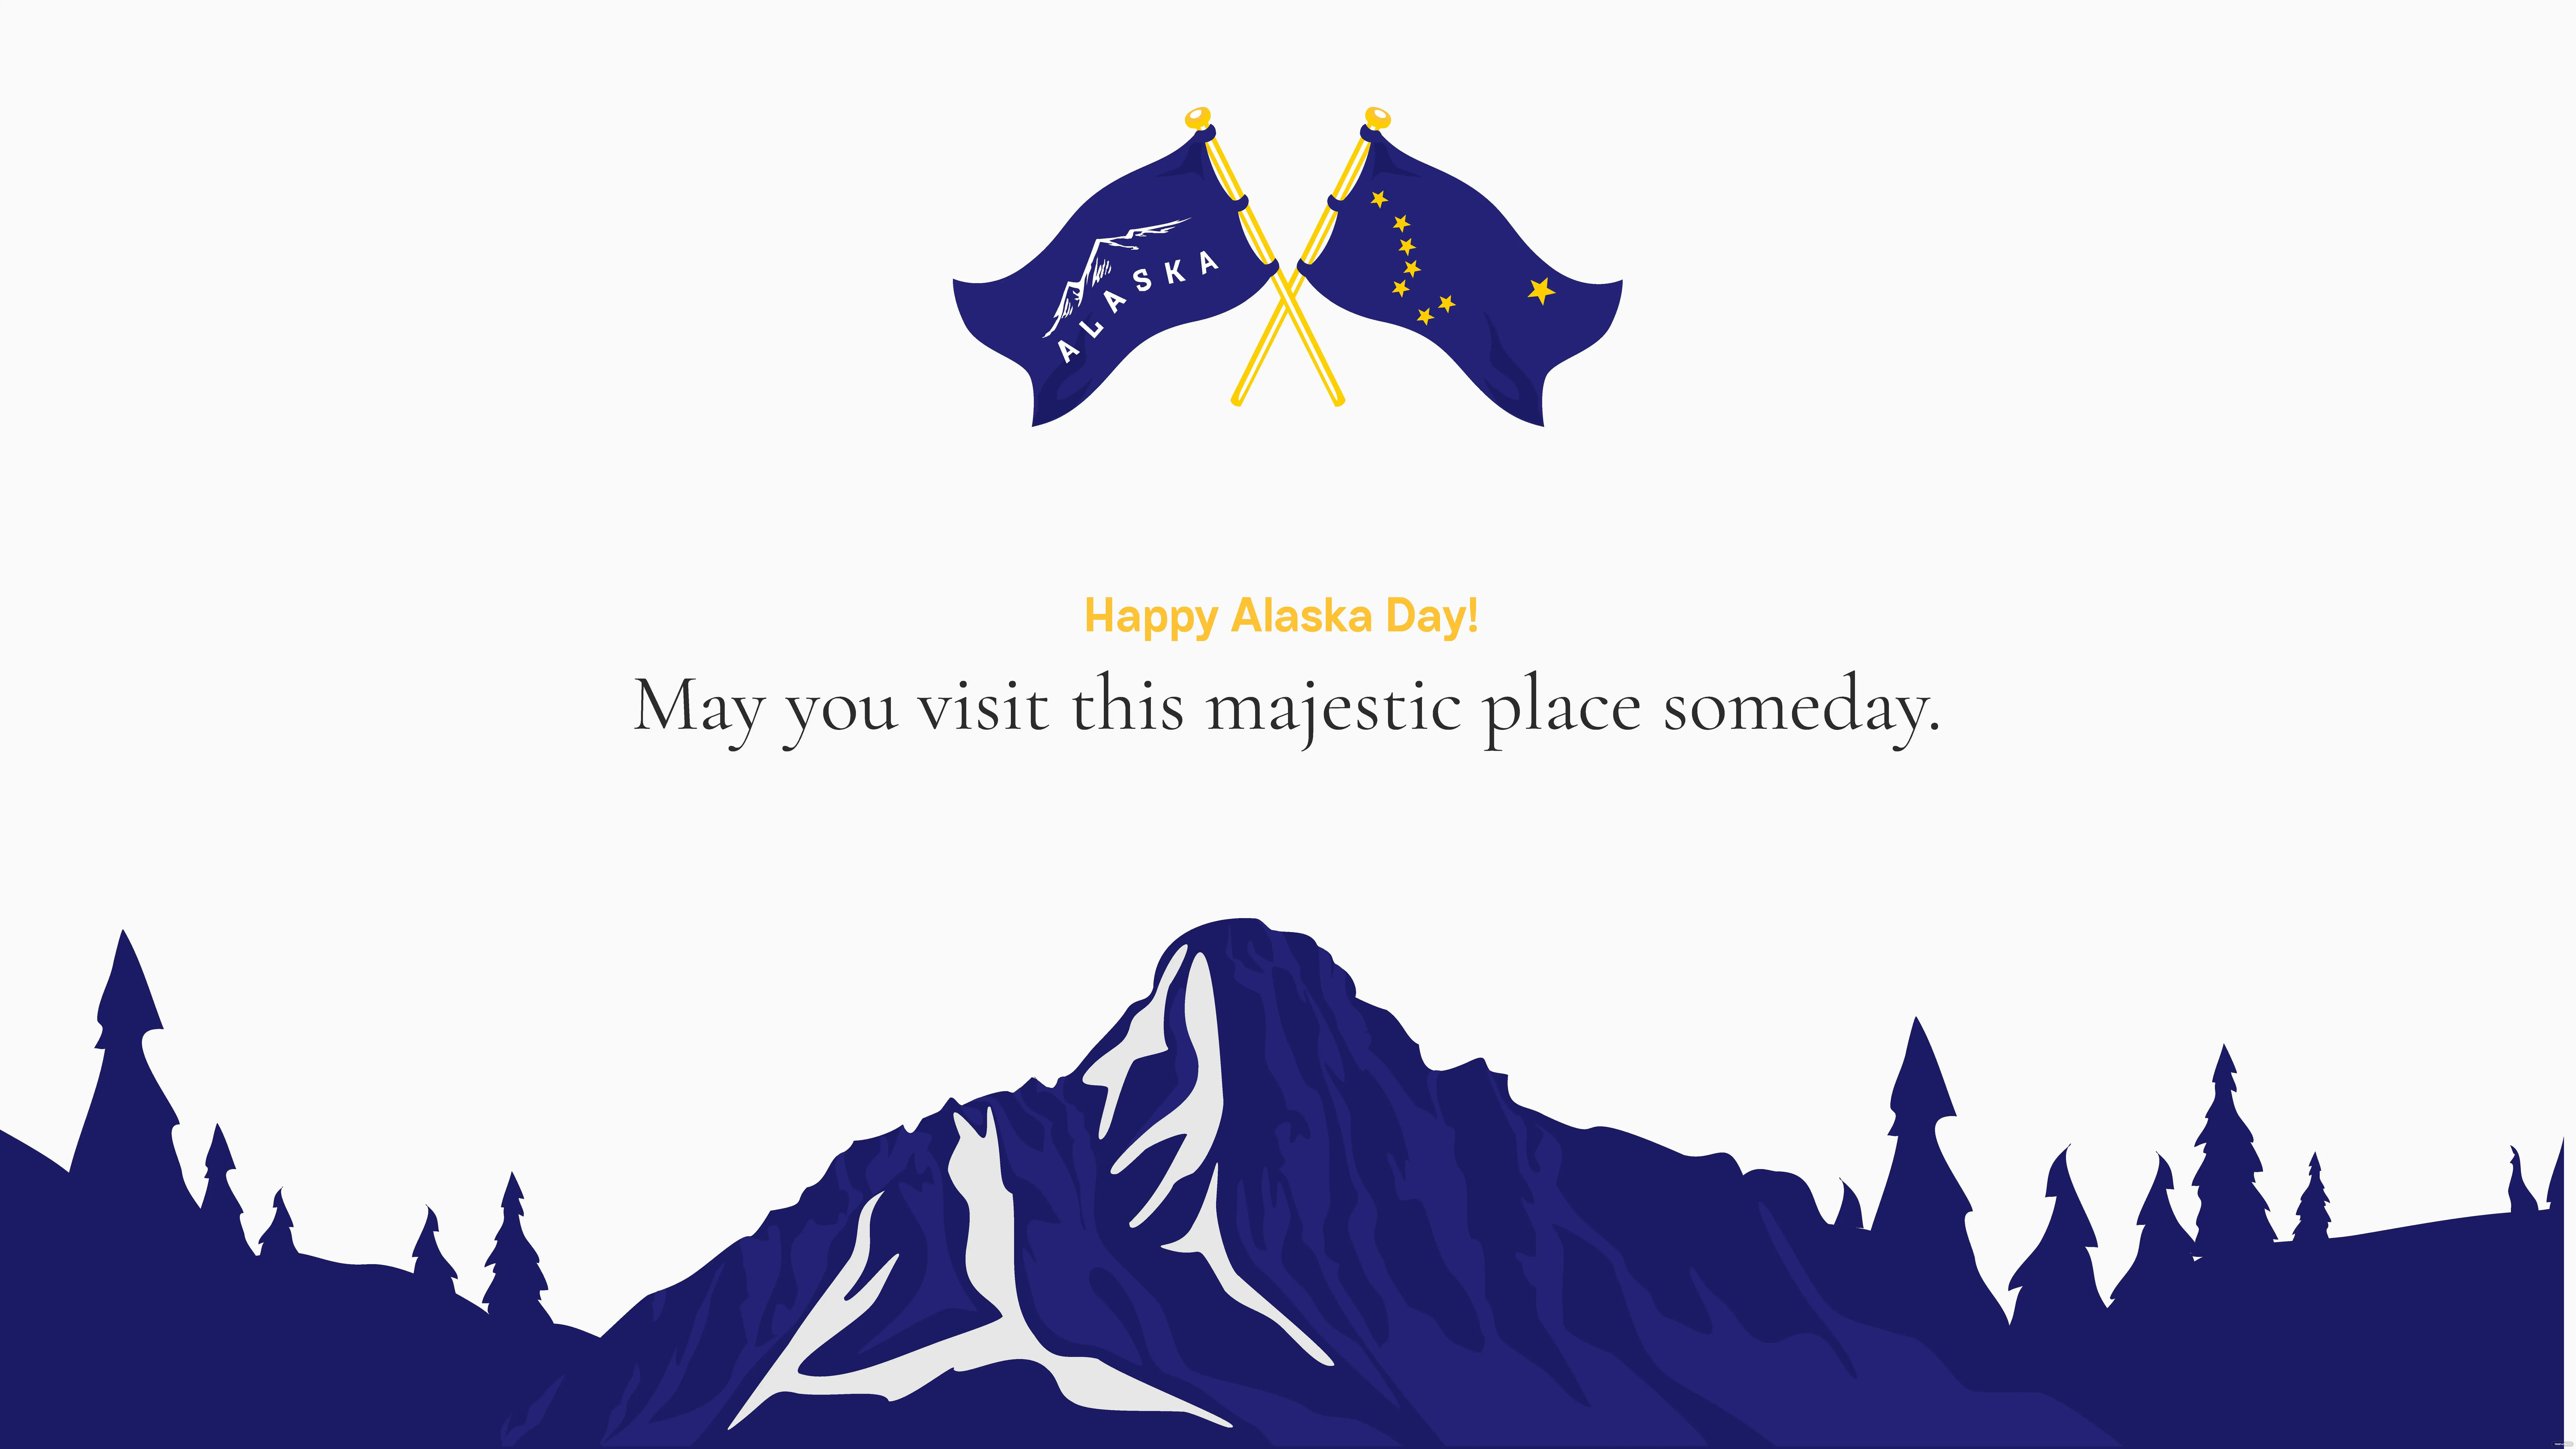 alaska day greeting card ideas and examples